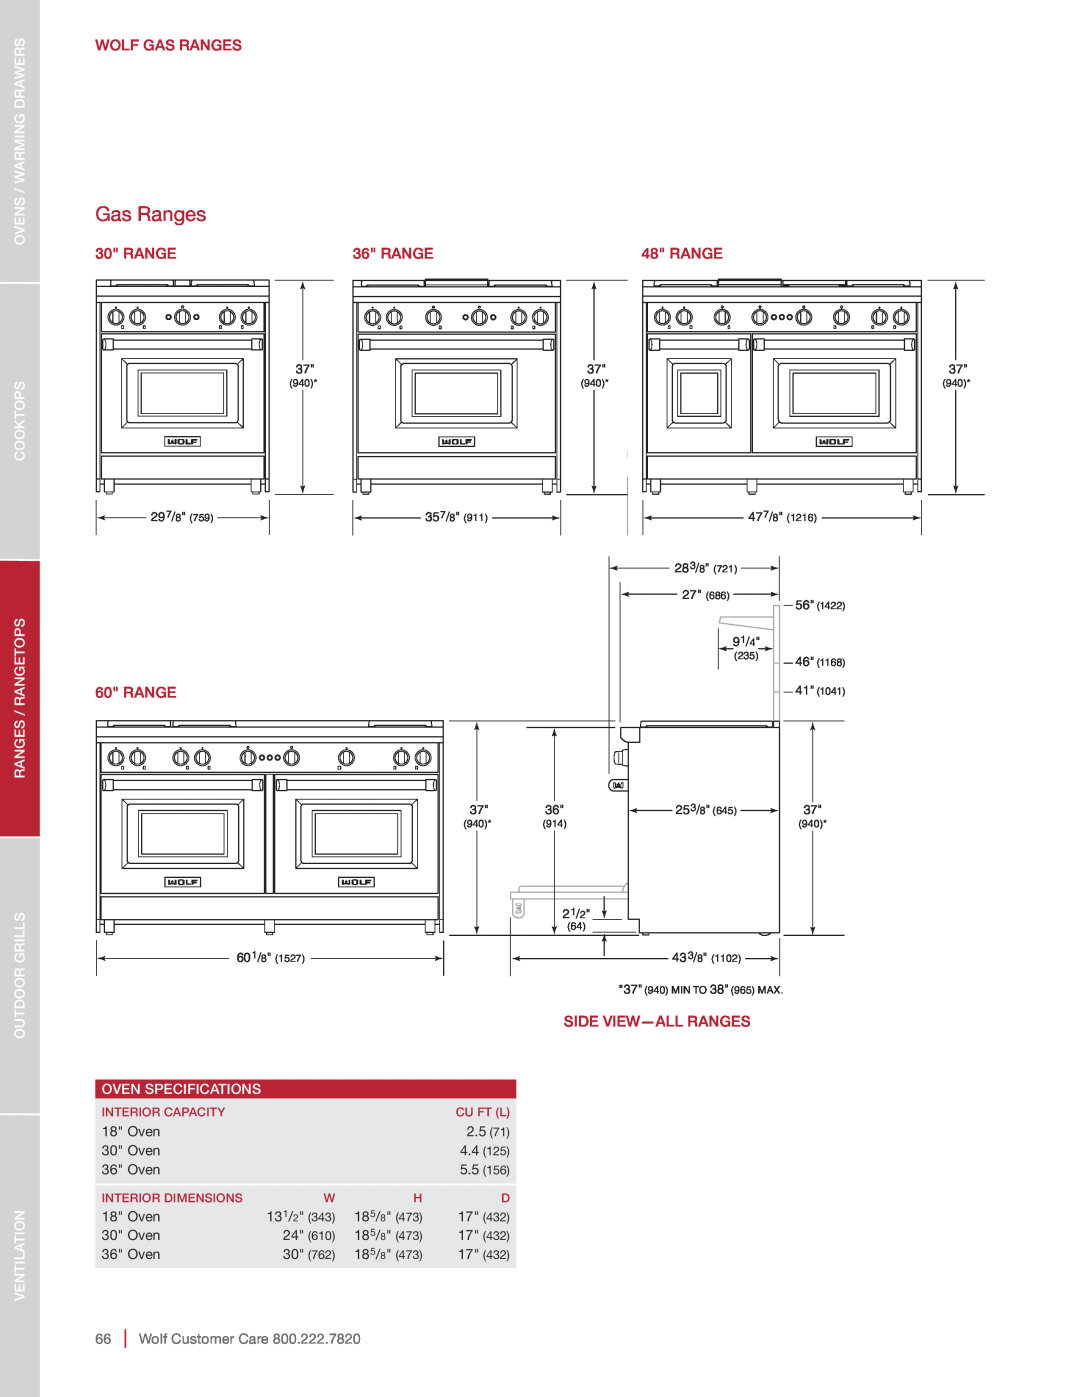 Sub-Zero SO30-2F/S-TH NA Ovens / Warming Drawers Cooktops, Wolf Gas Ranges, Side View-All Ranges, Oven Specifications 